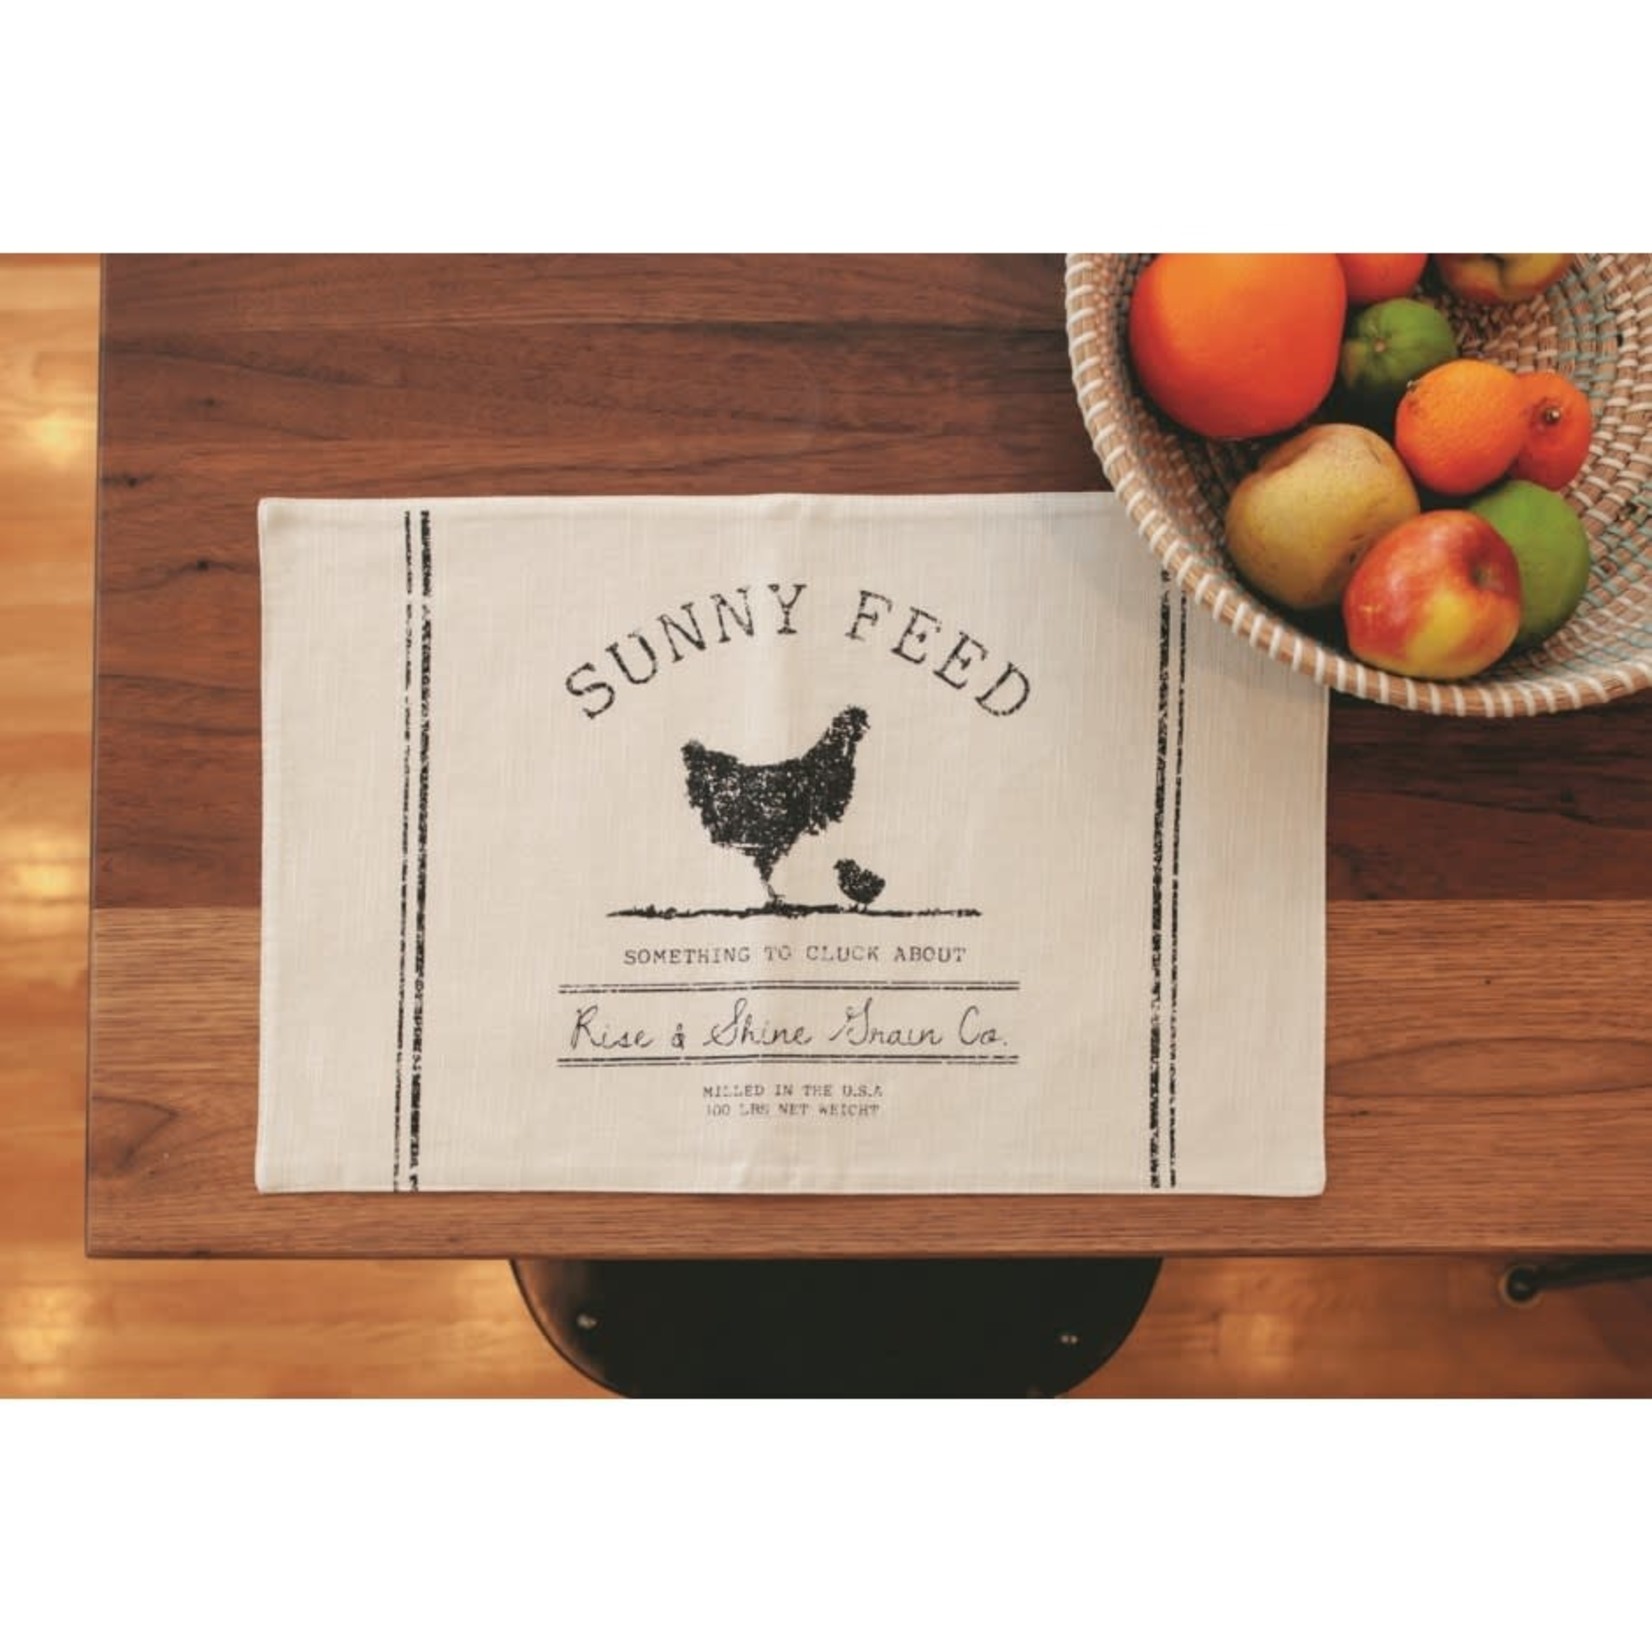 Sunny Feed Farmhouse Placemat